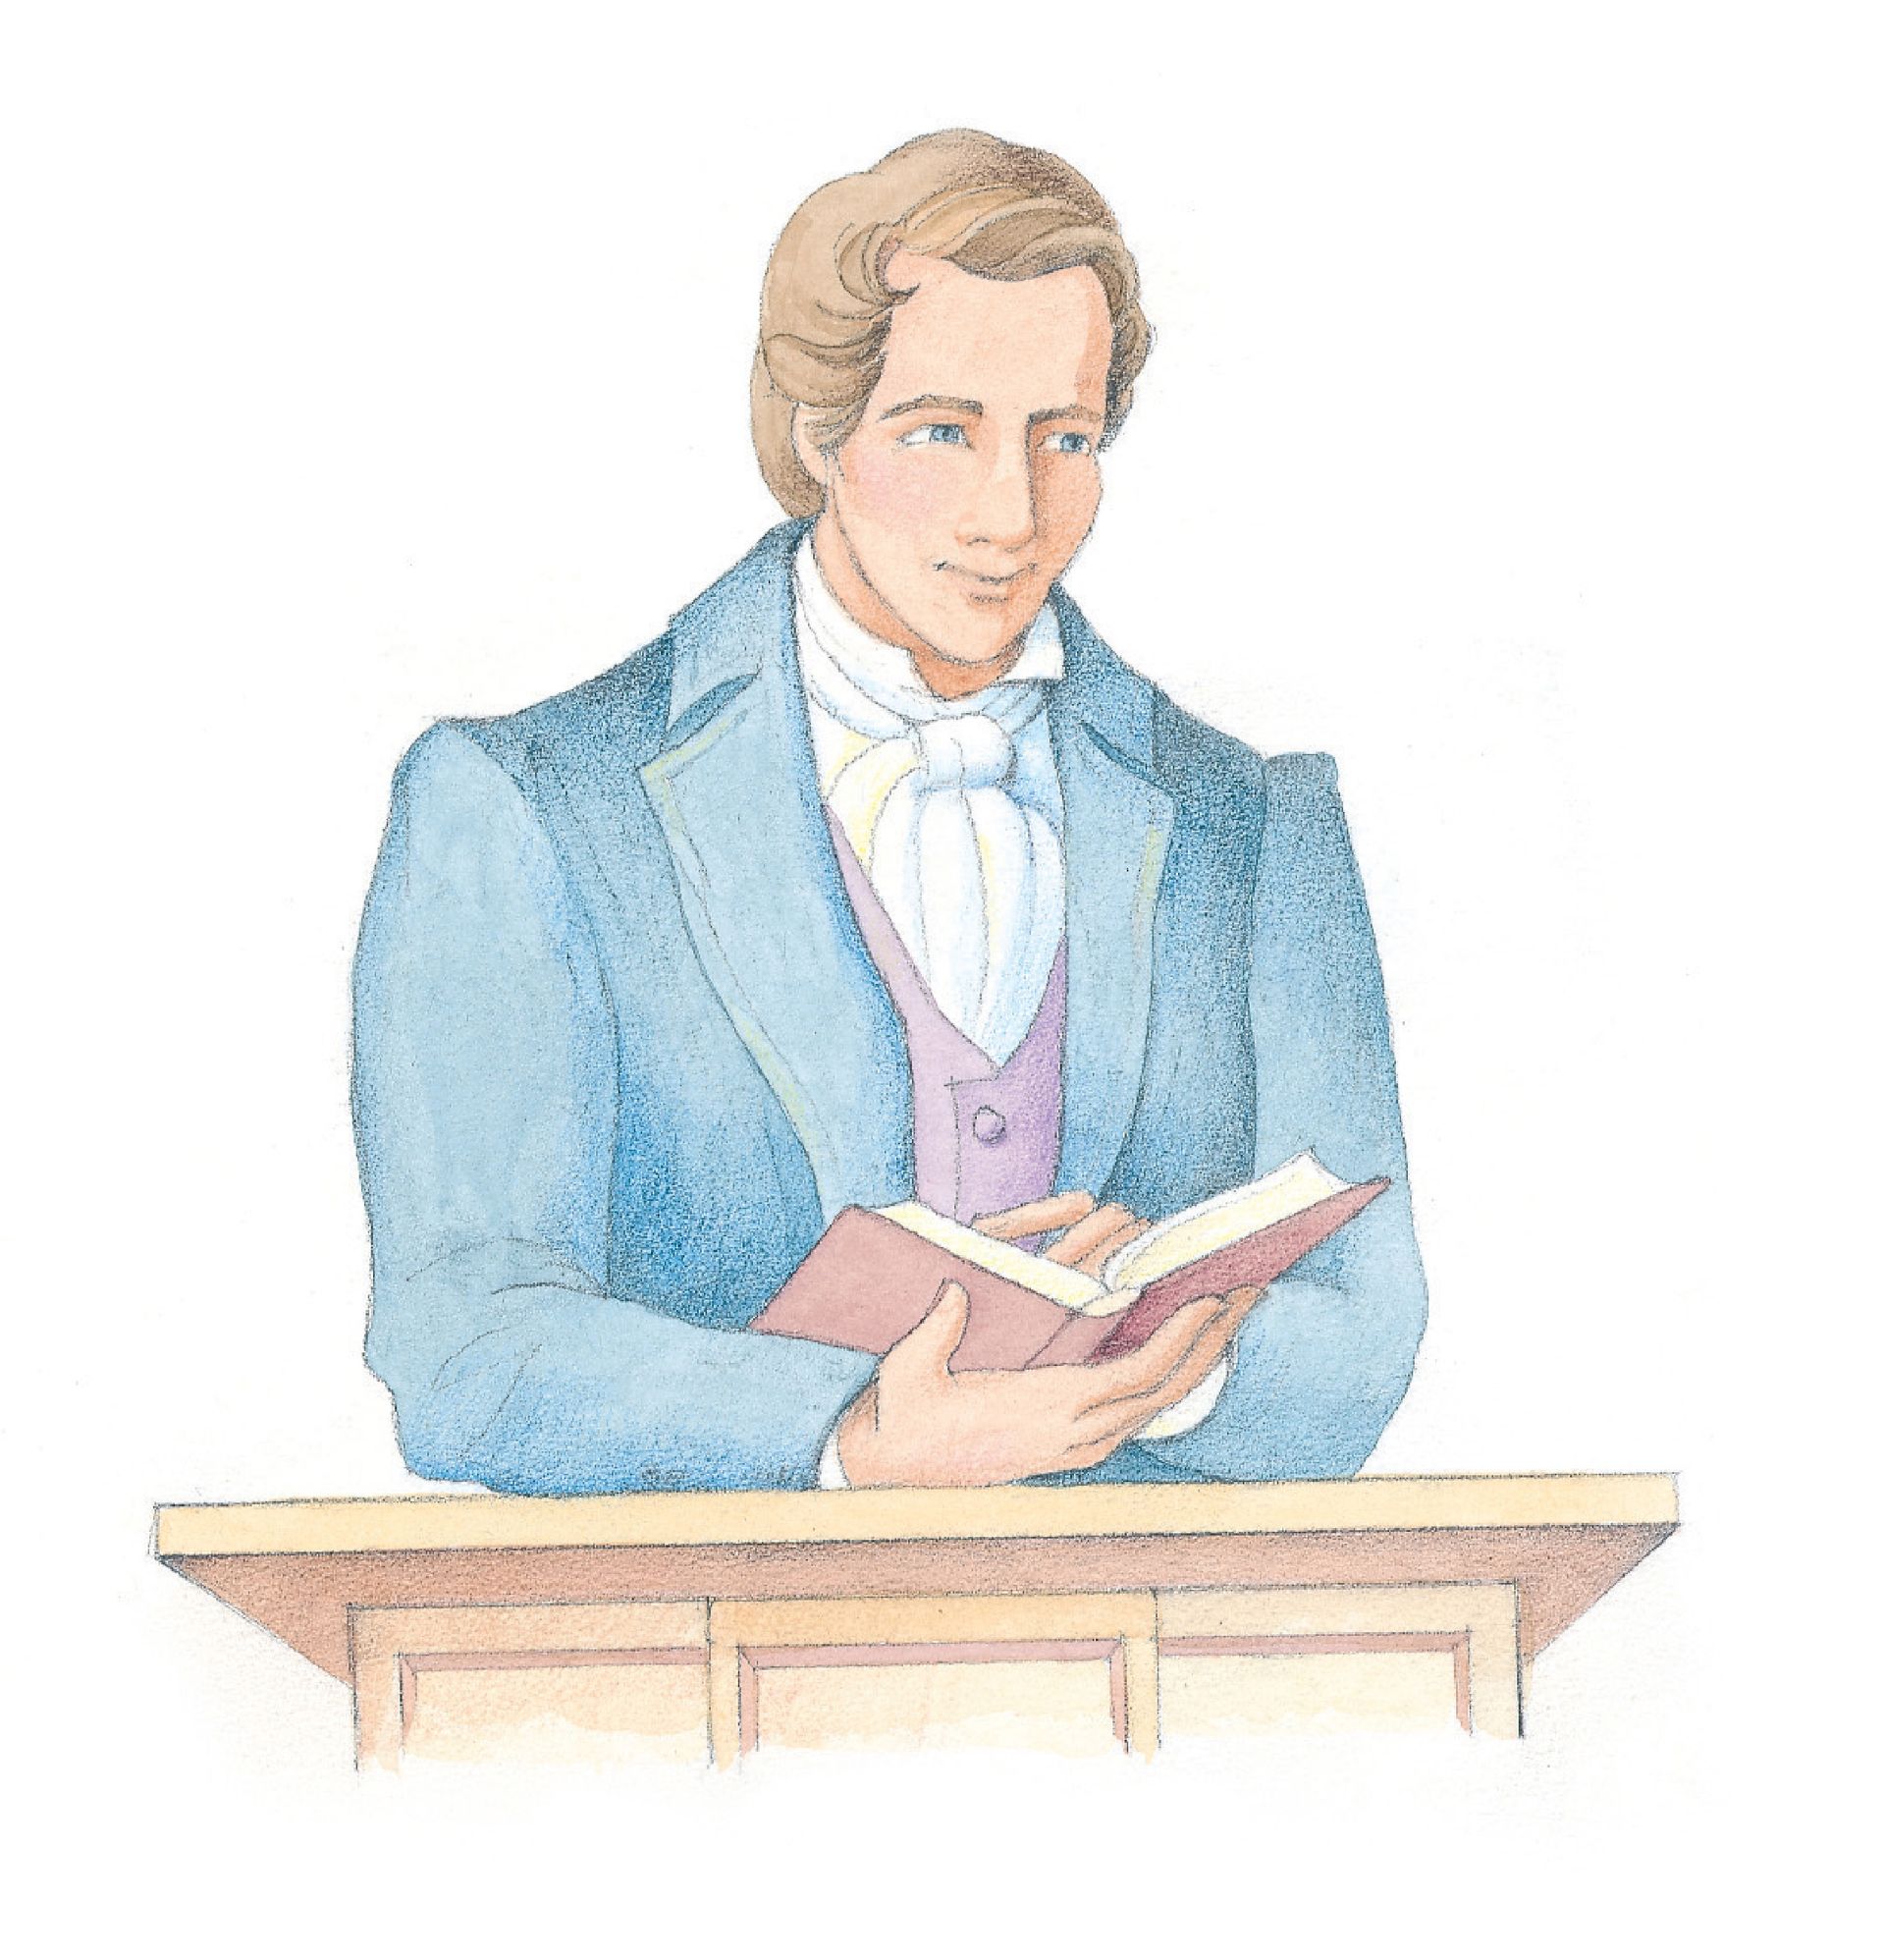 Joseph Smith standing at a podium with a book in hand. From the Children’s Songbook, page 159, “Stand for the Right”; watercolor illustration by Phyllis Luch.